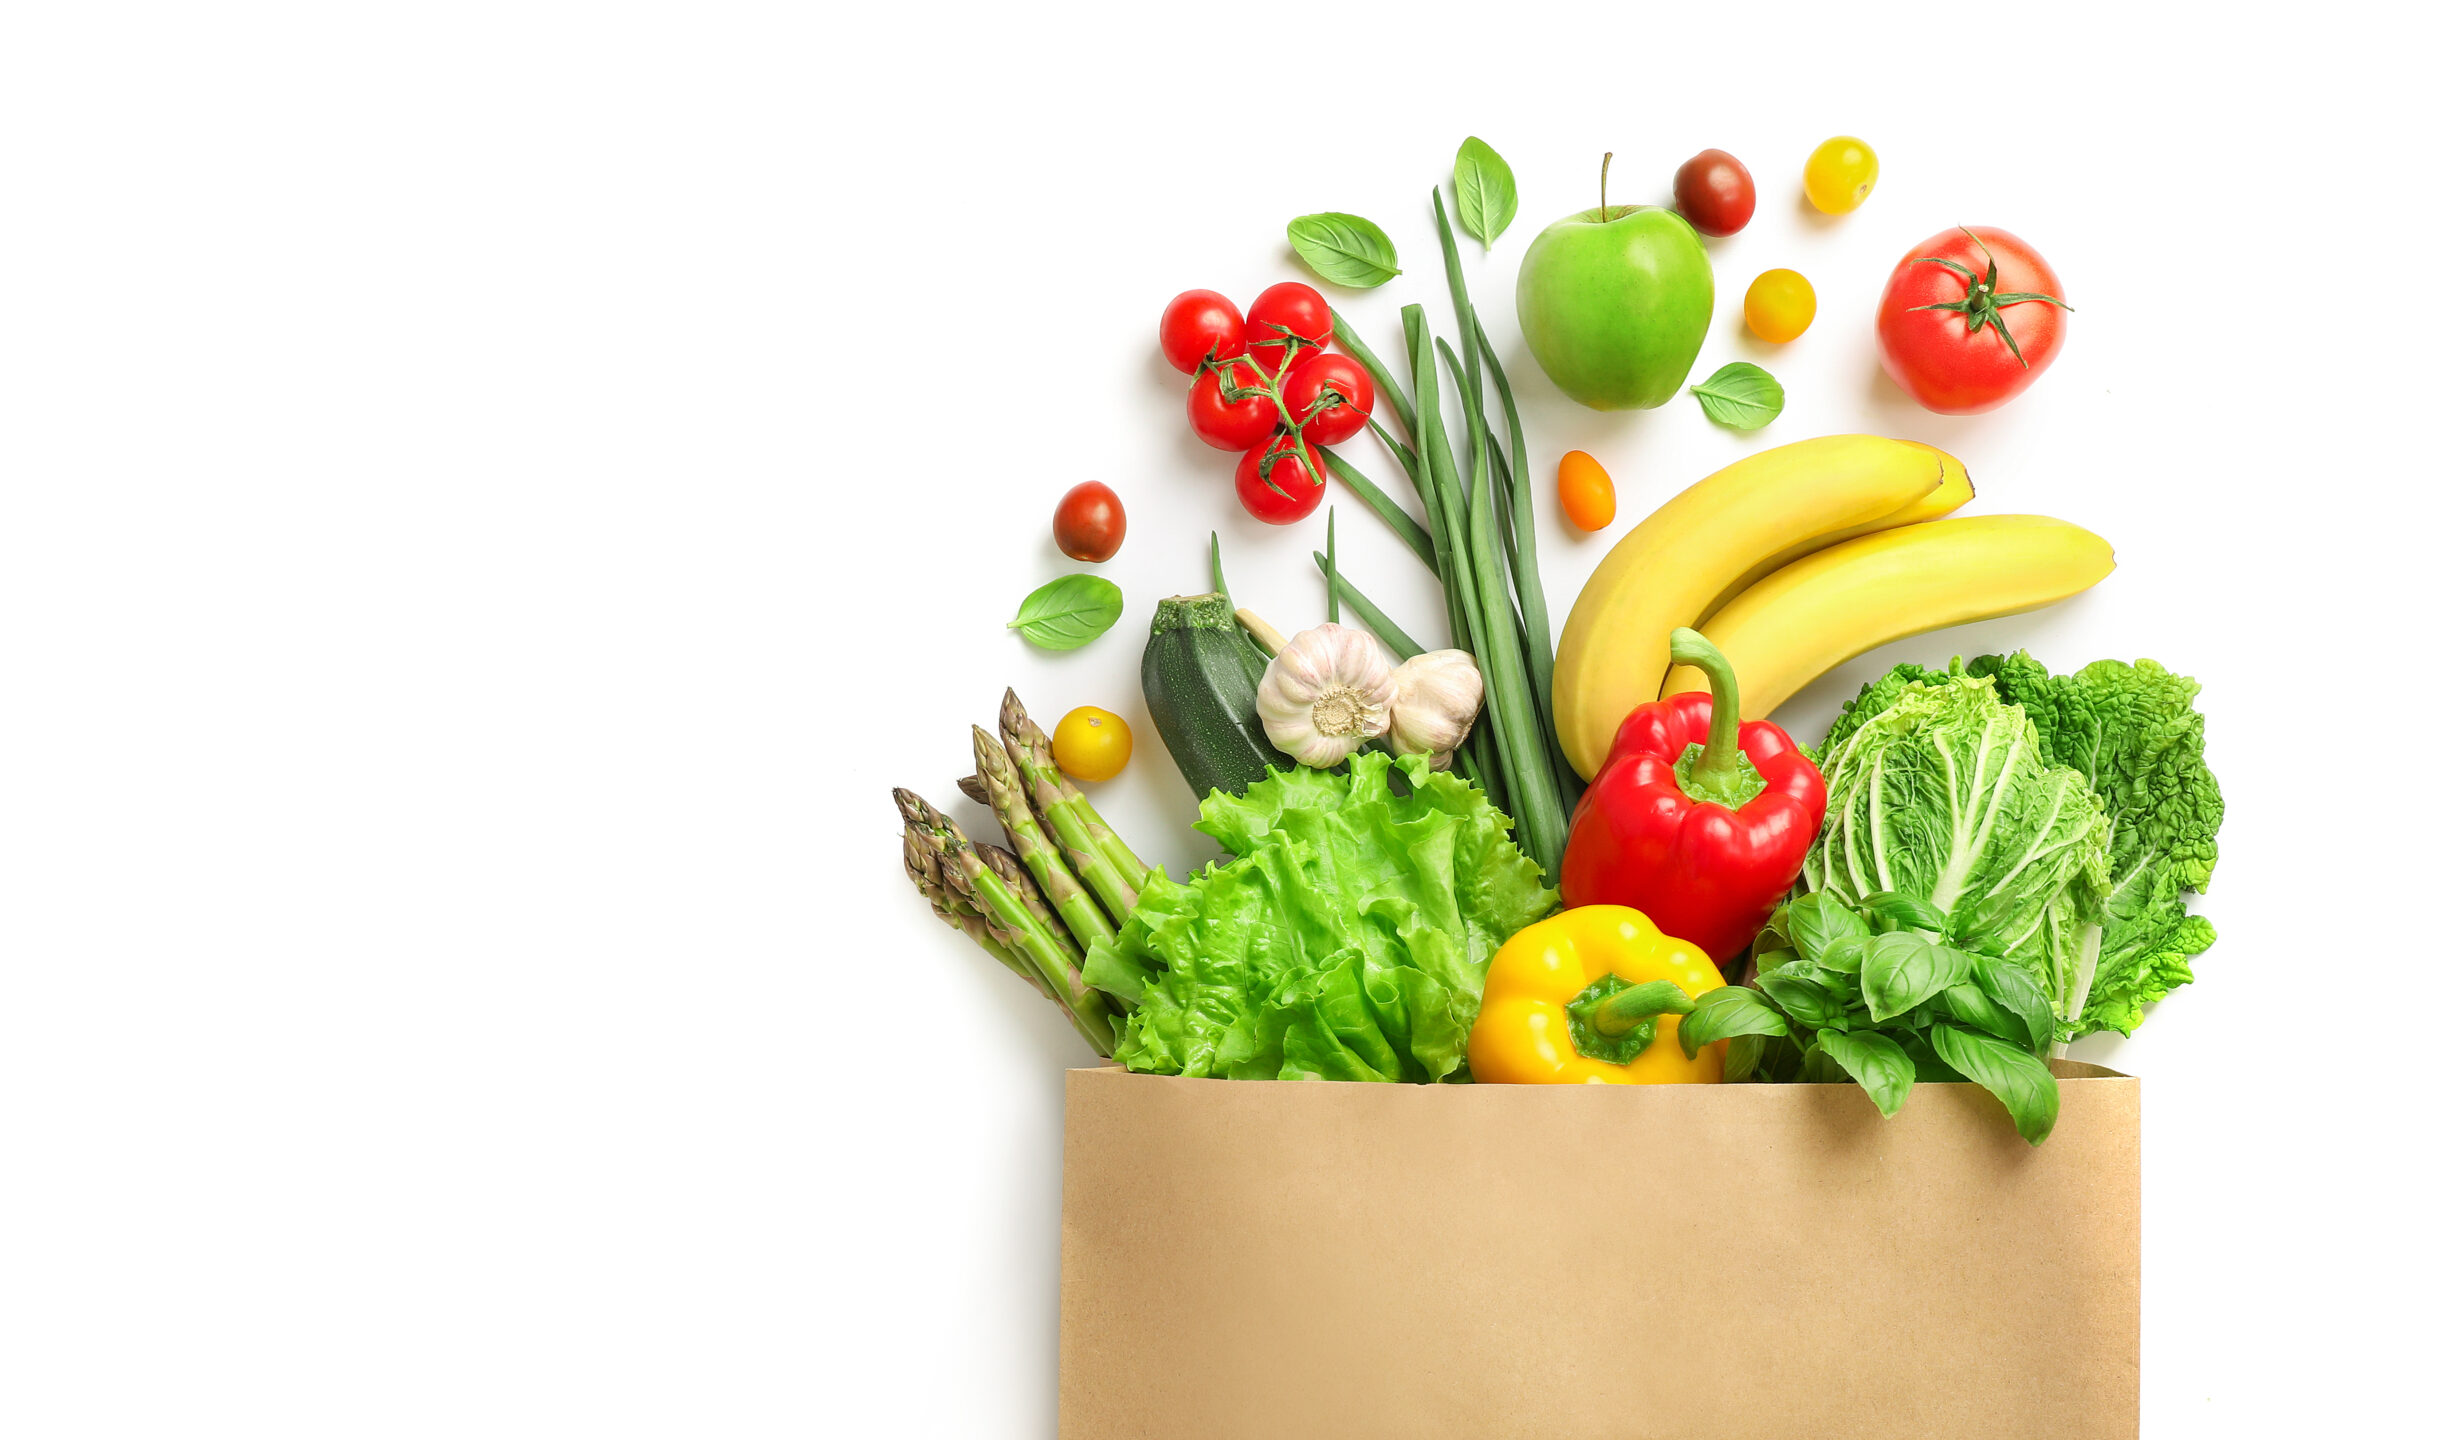  Image of a bag full of fresh brightly-colored fruits and vegetables.